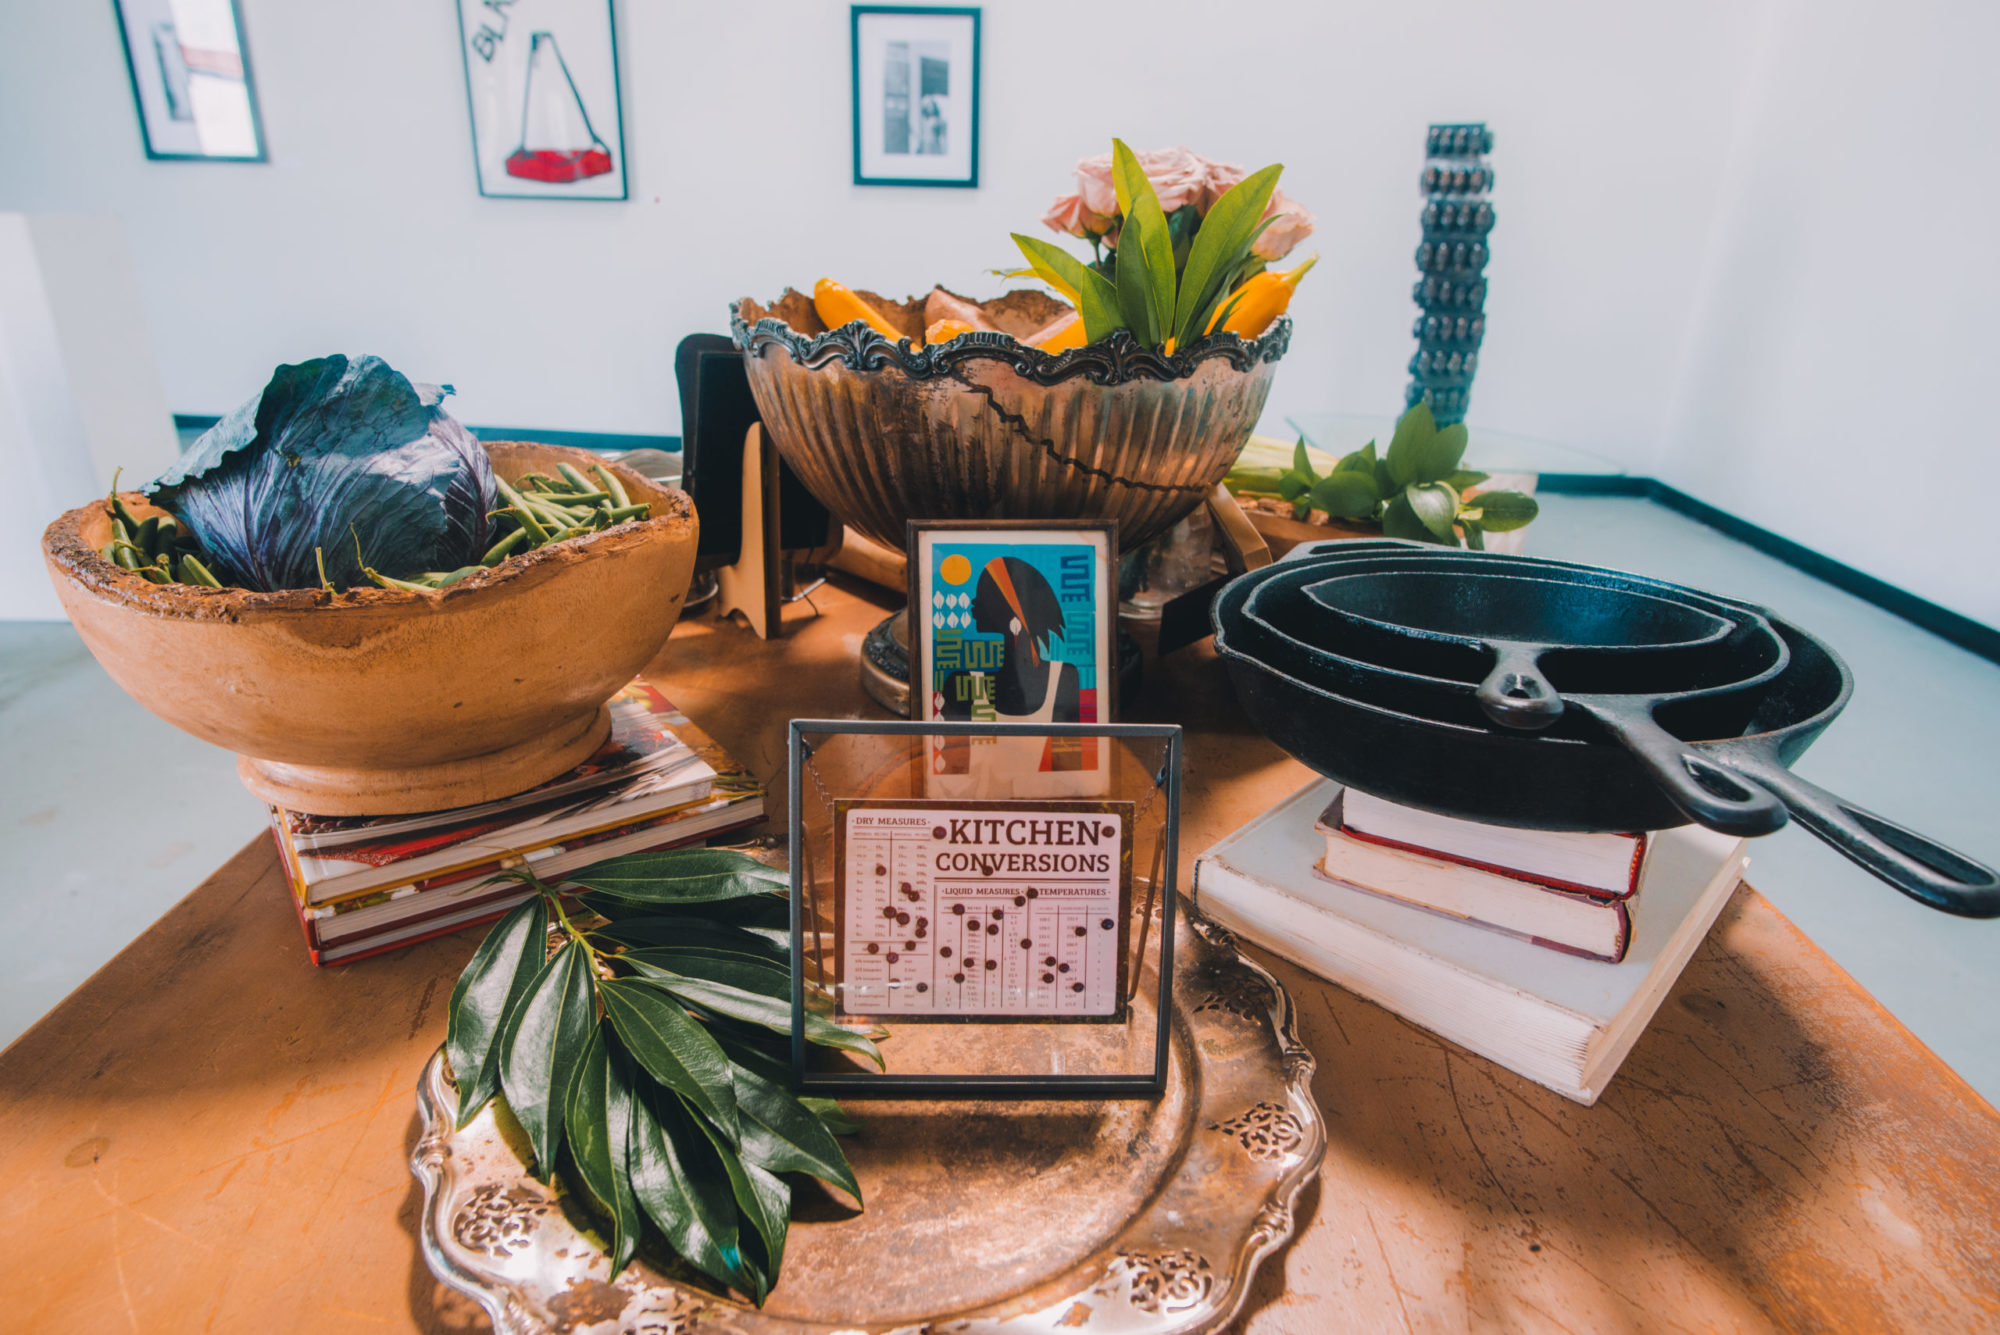 A photo of a wooden table in a room with white walls. Several bowls, plates and pans sit on the table. Some of them are resting on stacks of books. In the bowl closest to the walls there are flowers and fruit. In the plate closest to the viewer there are green leaves and a framed plaque that reads 